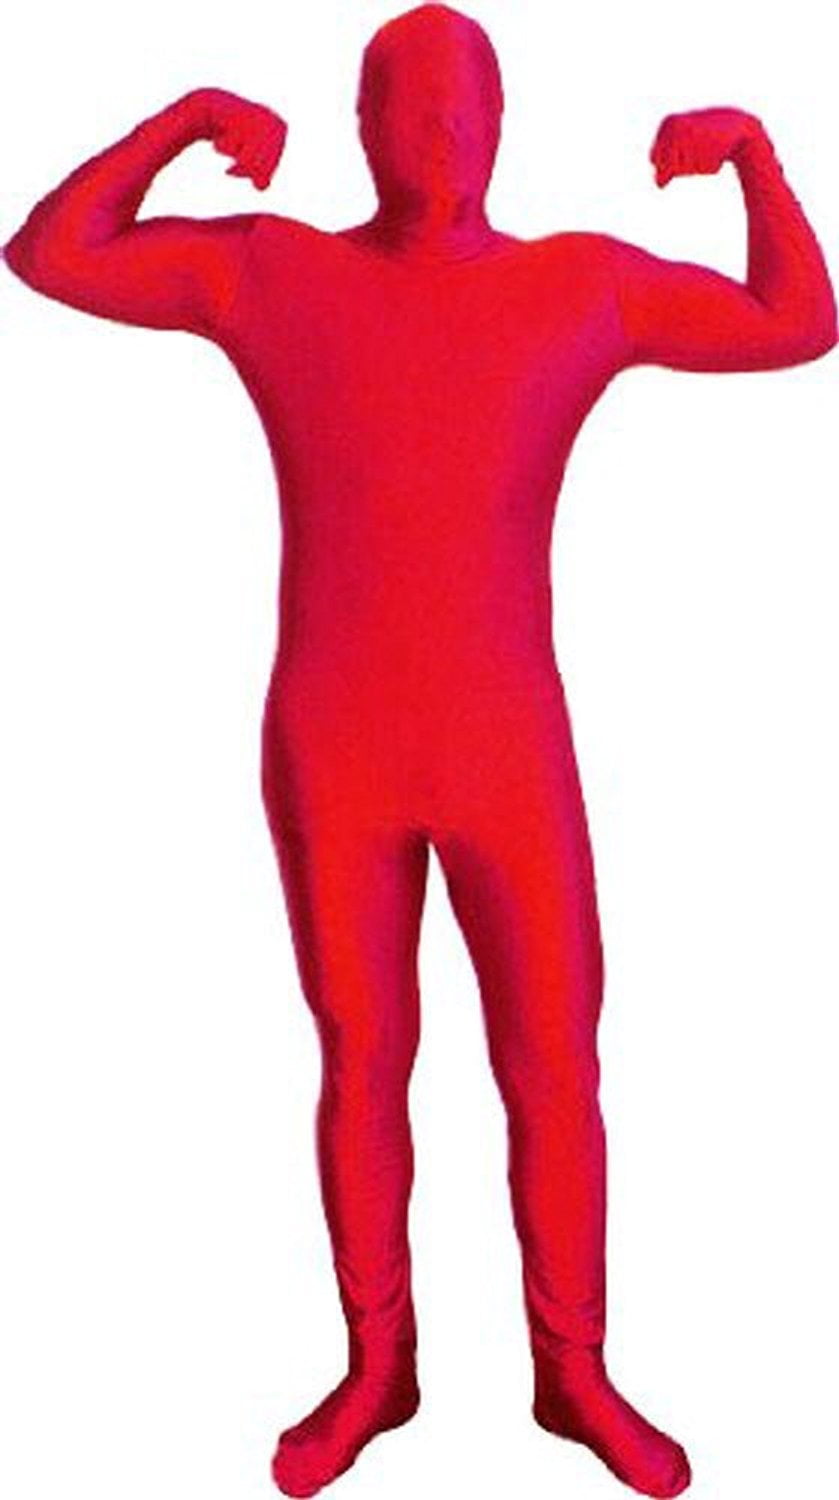  Full Bodysuit Womens Costume Without Hood Spandex